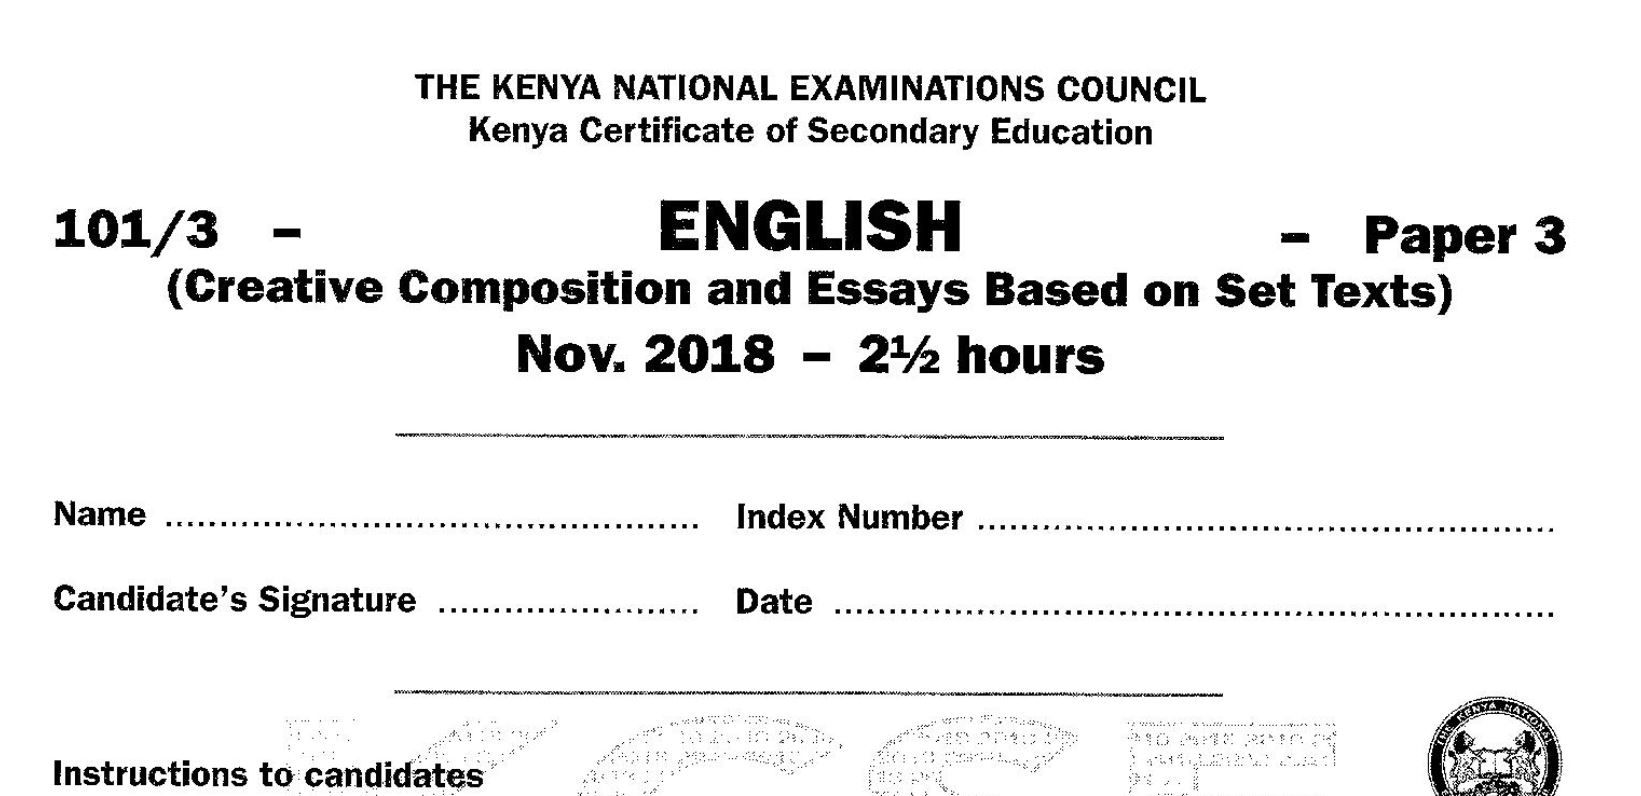 KCSE English Paper 3, 2018 with KNEC Marking Scheme (Answers)